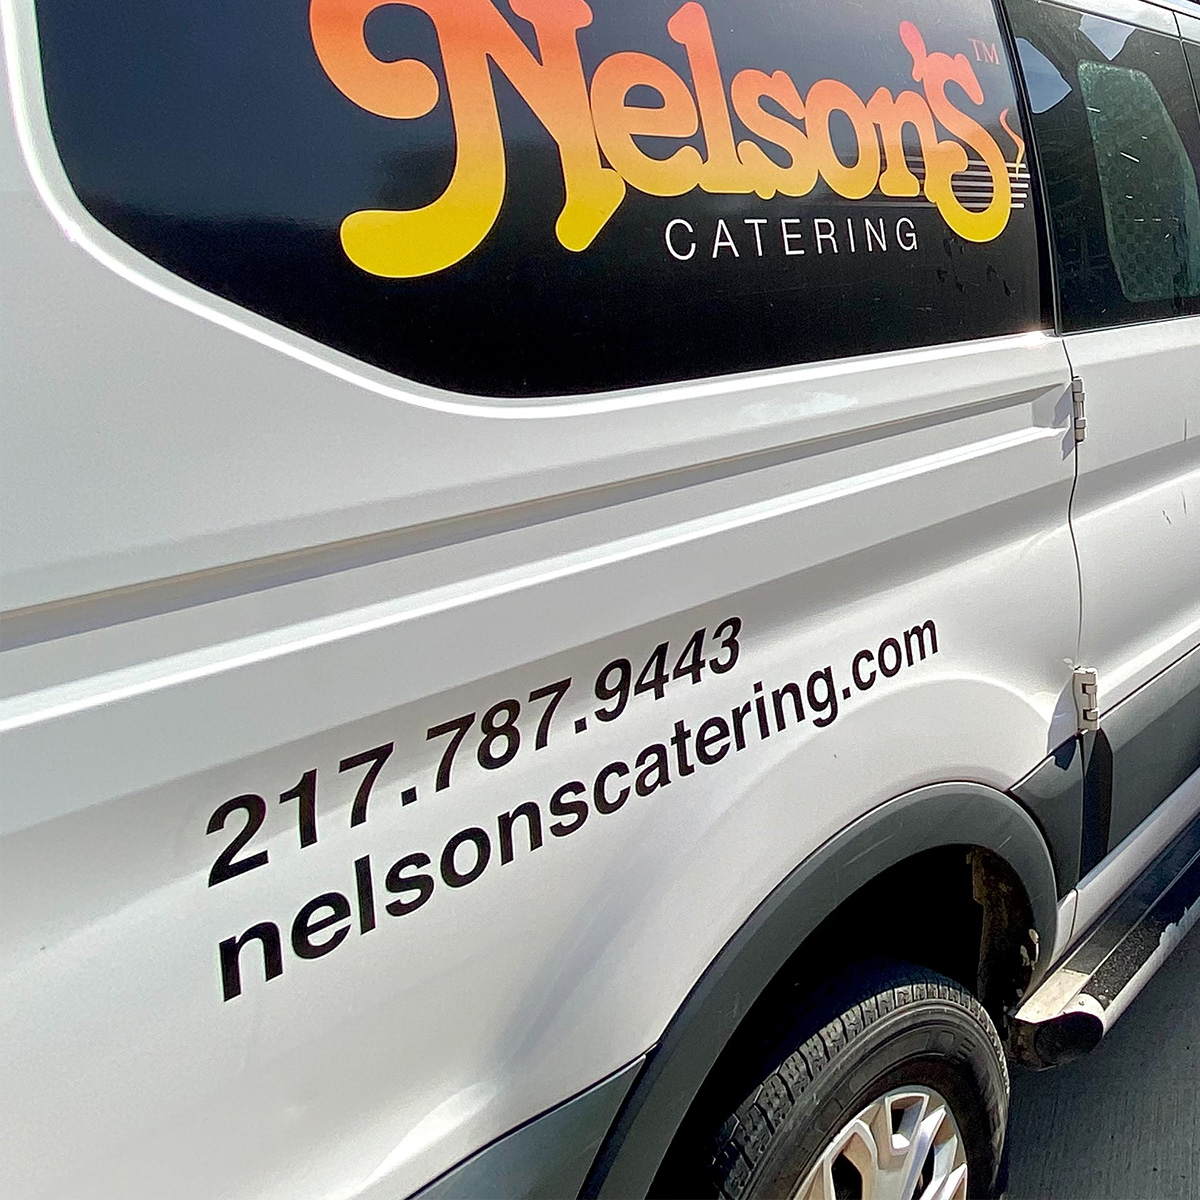 Nelson's Catering delivery truck